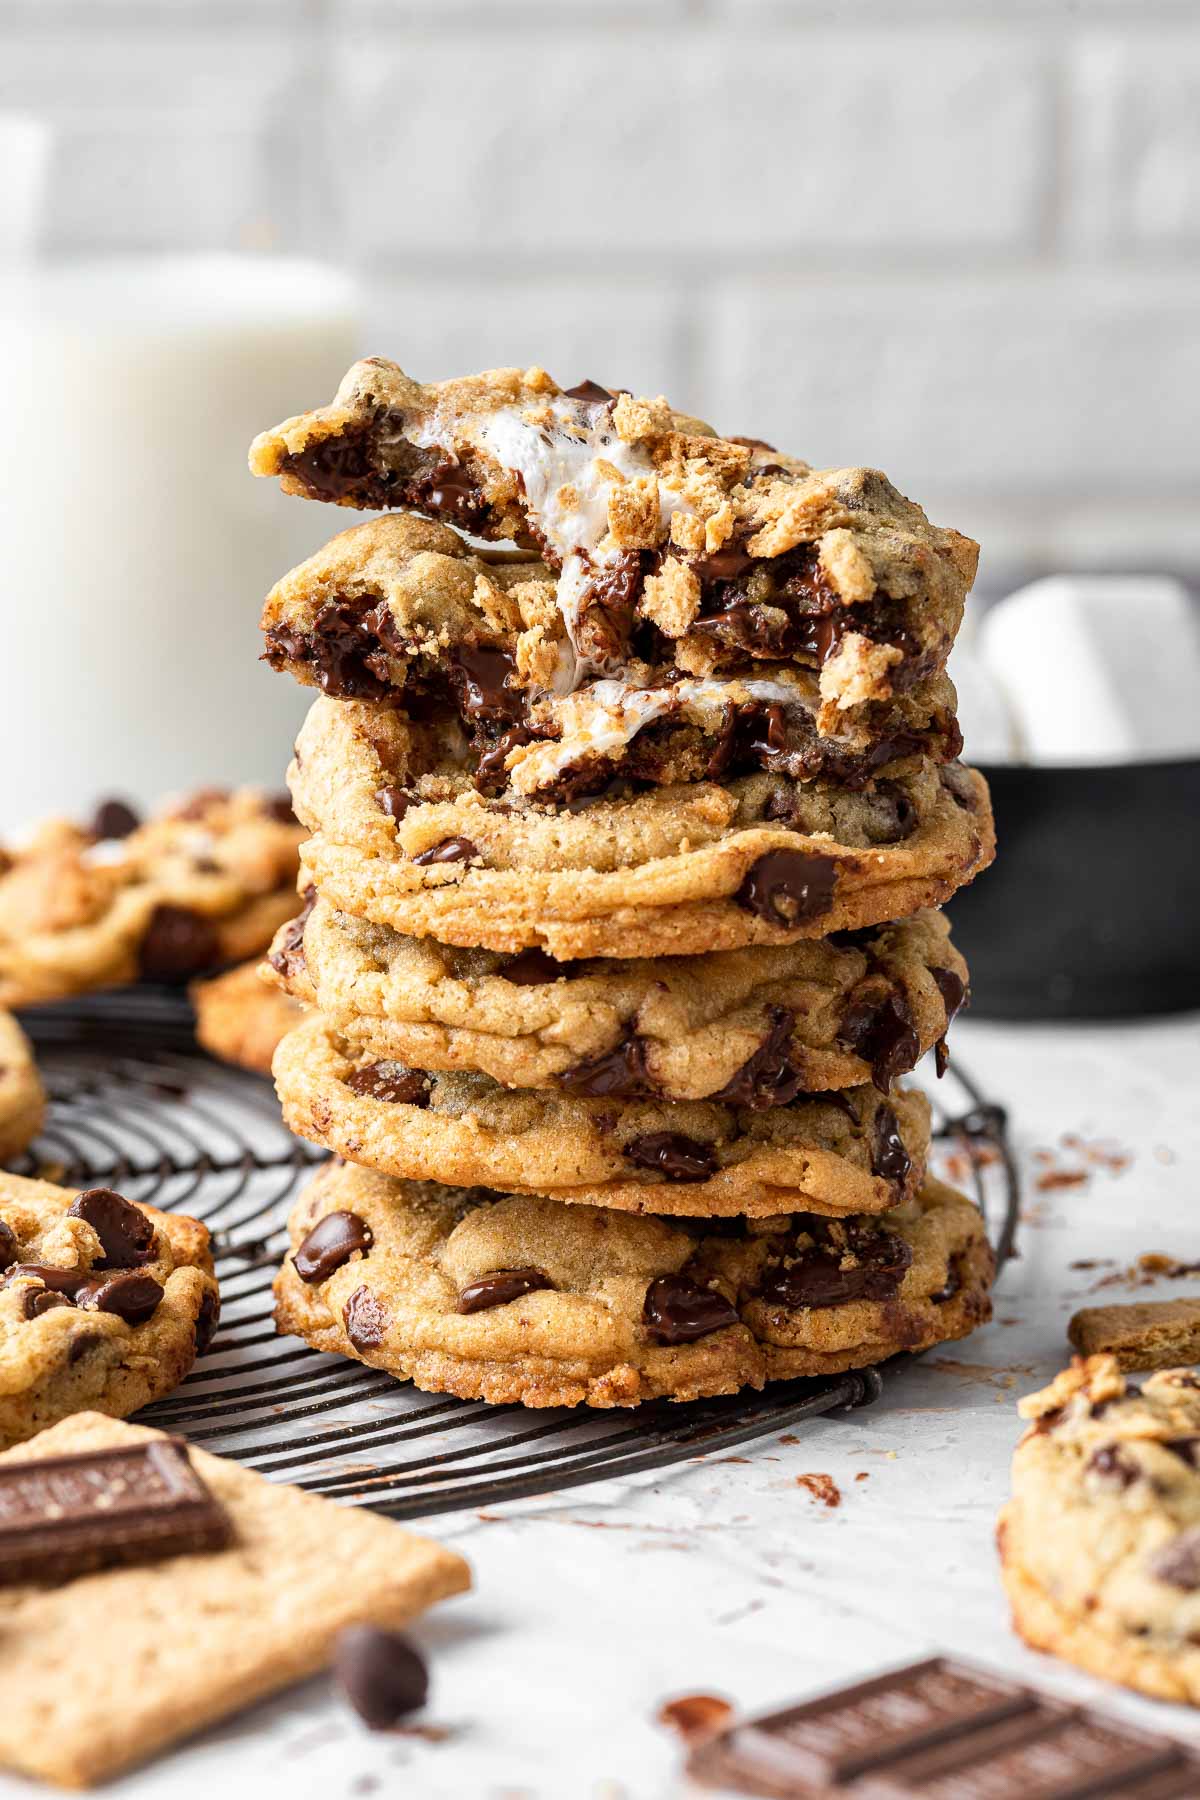 100 Best Cookie Recipes - Easy Cookie Recipes To Bake